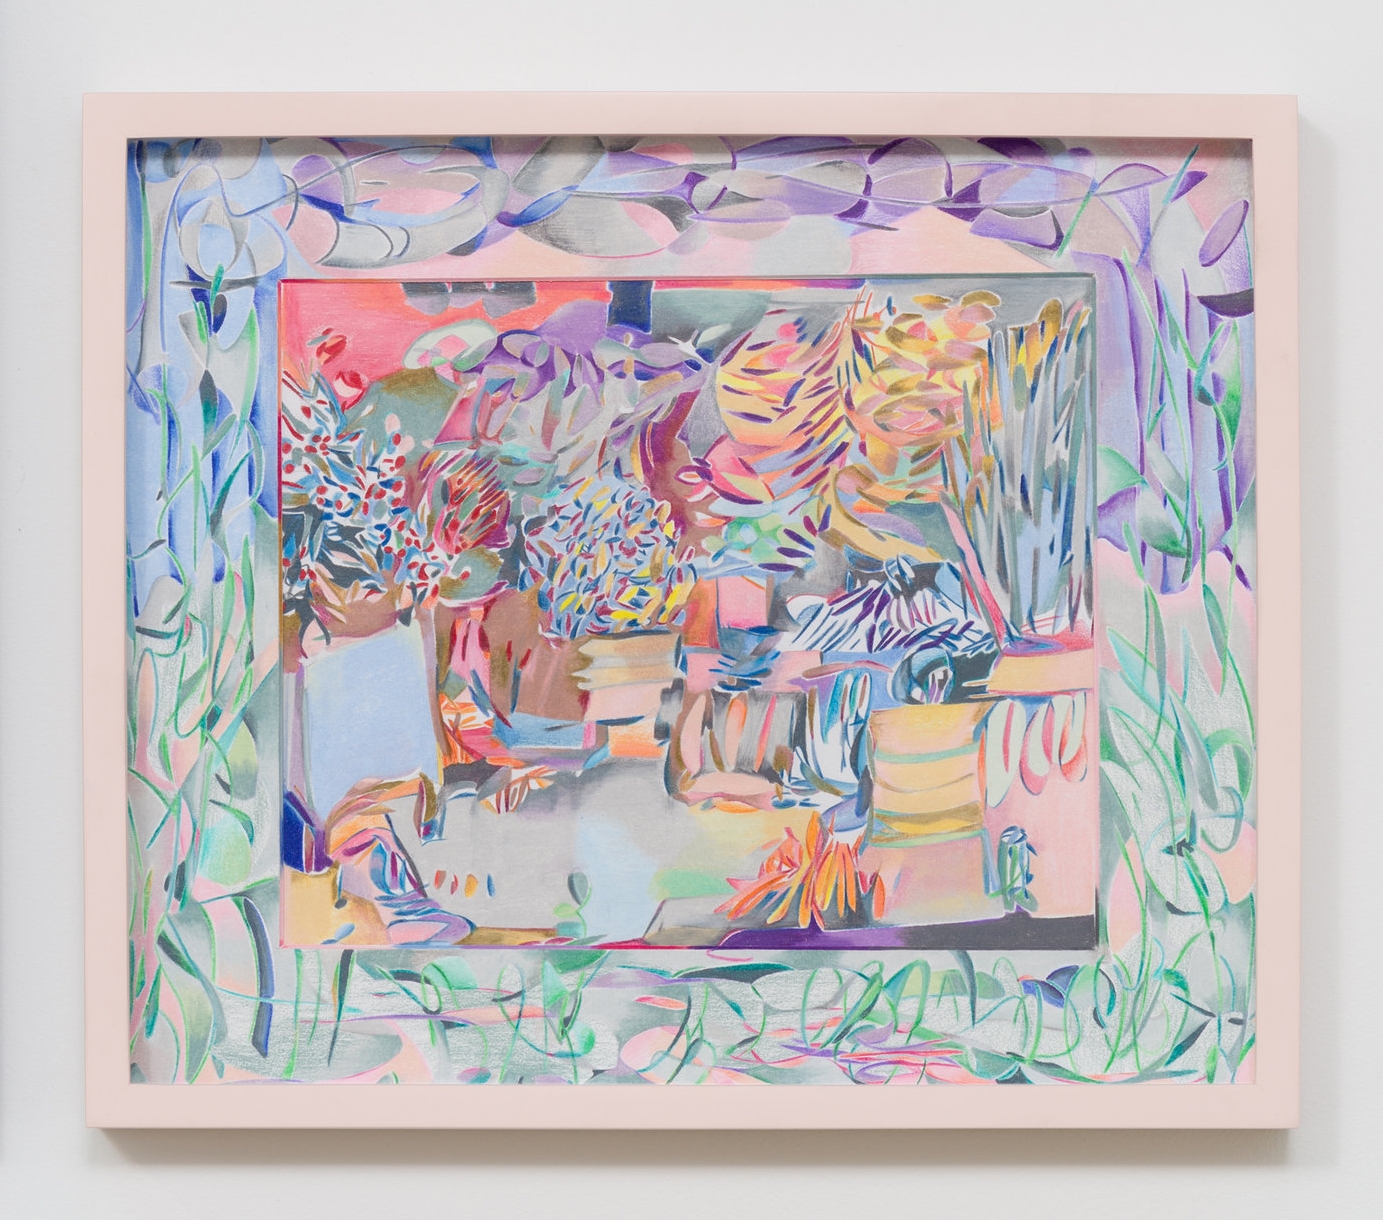   Sarah Ann Weber    Tuileries Garden   2016 Prismacolor colored pencils on paper and mat board, artist’s frame 12 x 14 inches 